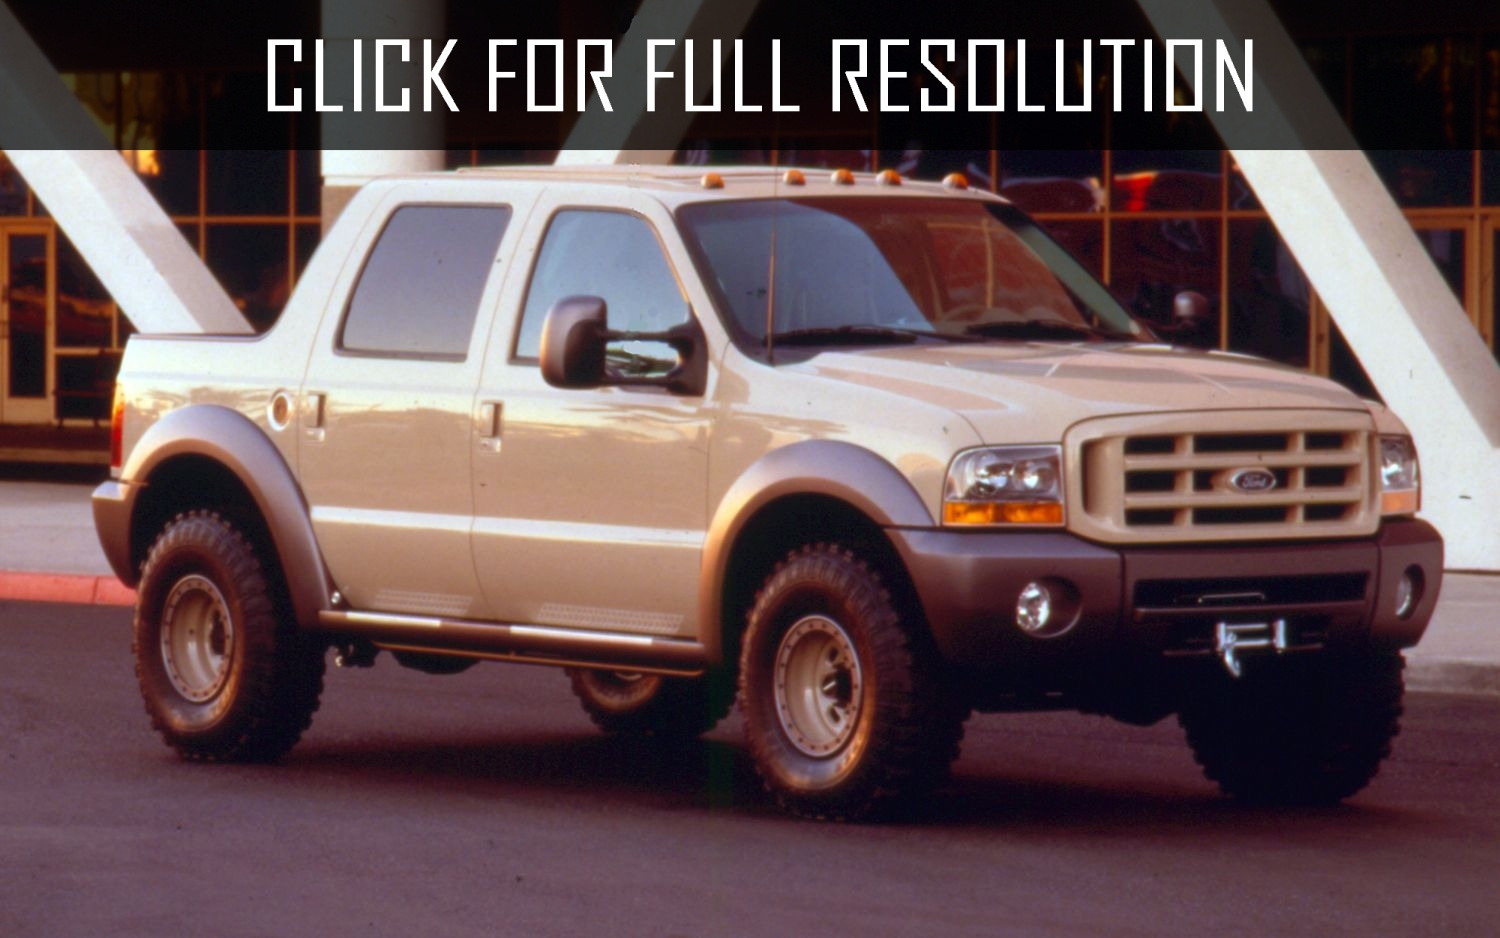 Ford Excursion Concept